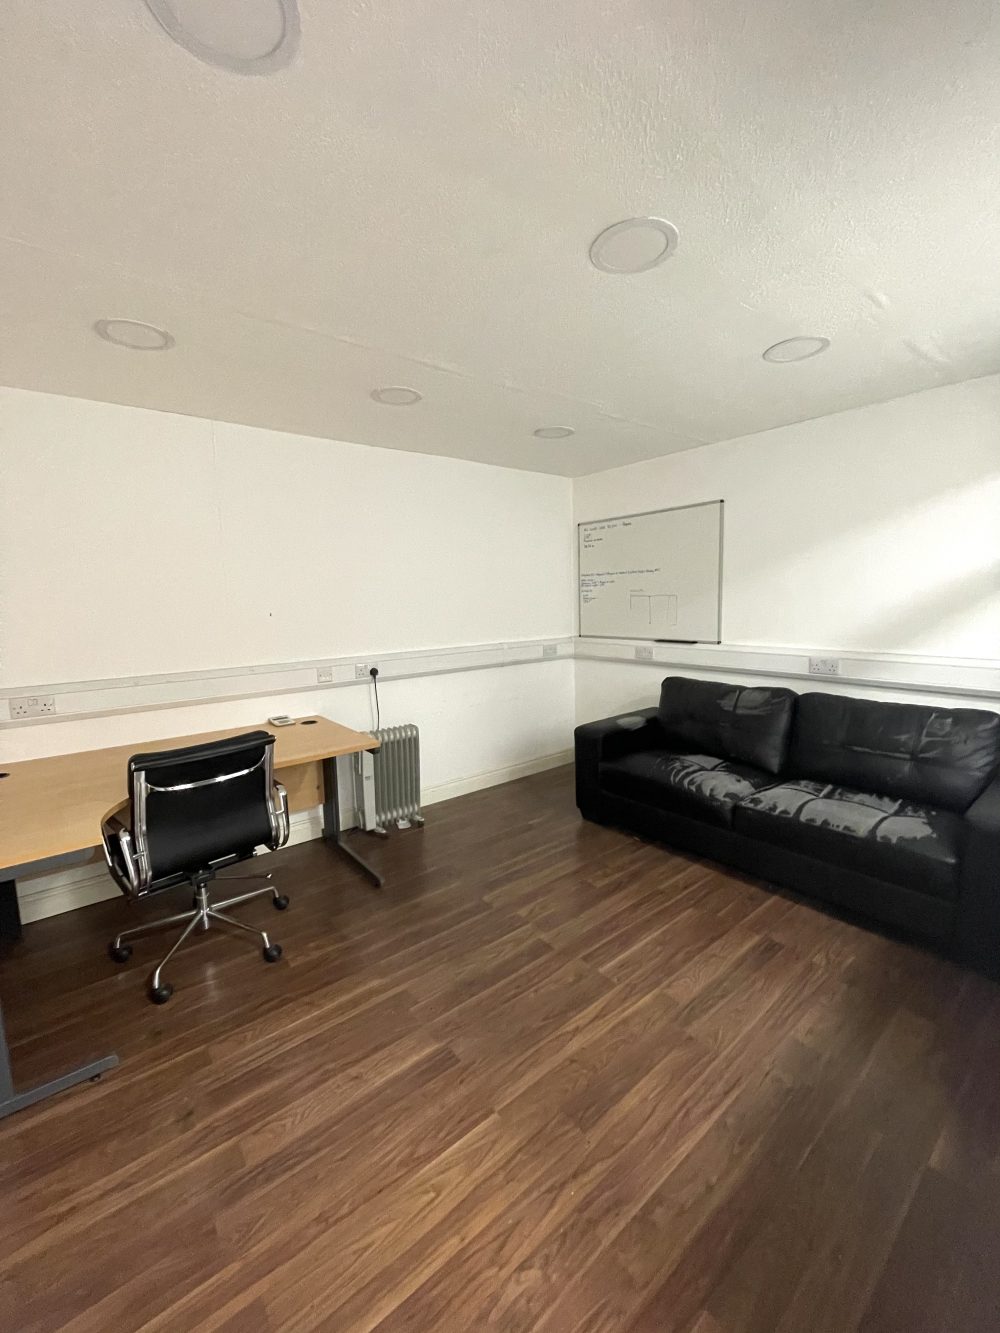 N15 Seven Sisters (High Cross, Fountayne Road) – Live work style Warehouse Unit to rent for artists 9